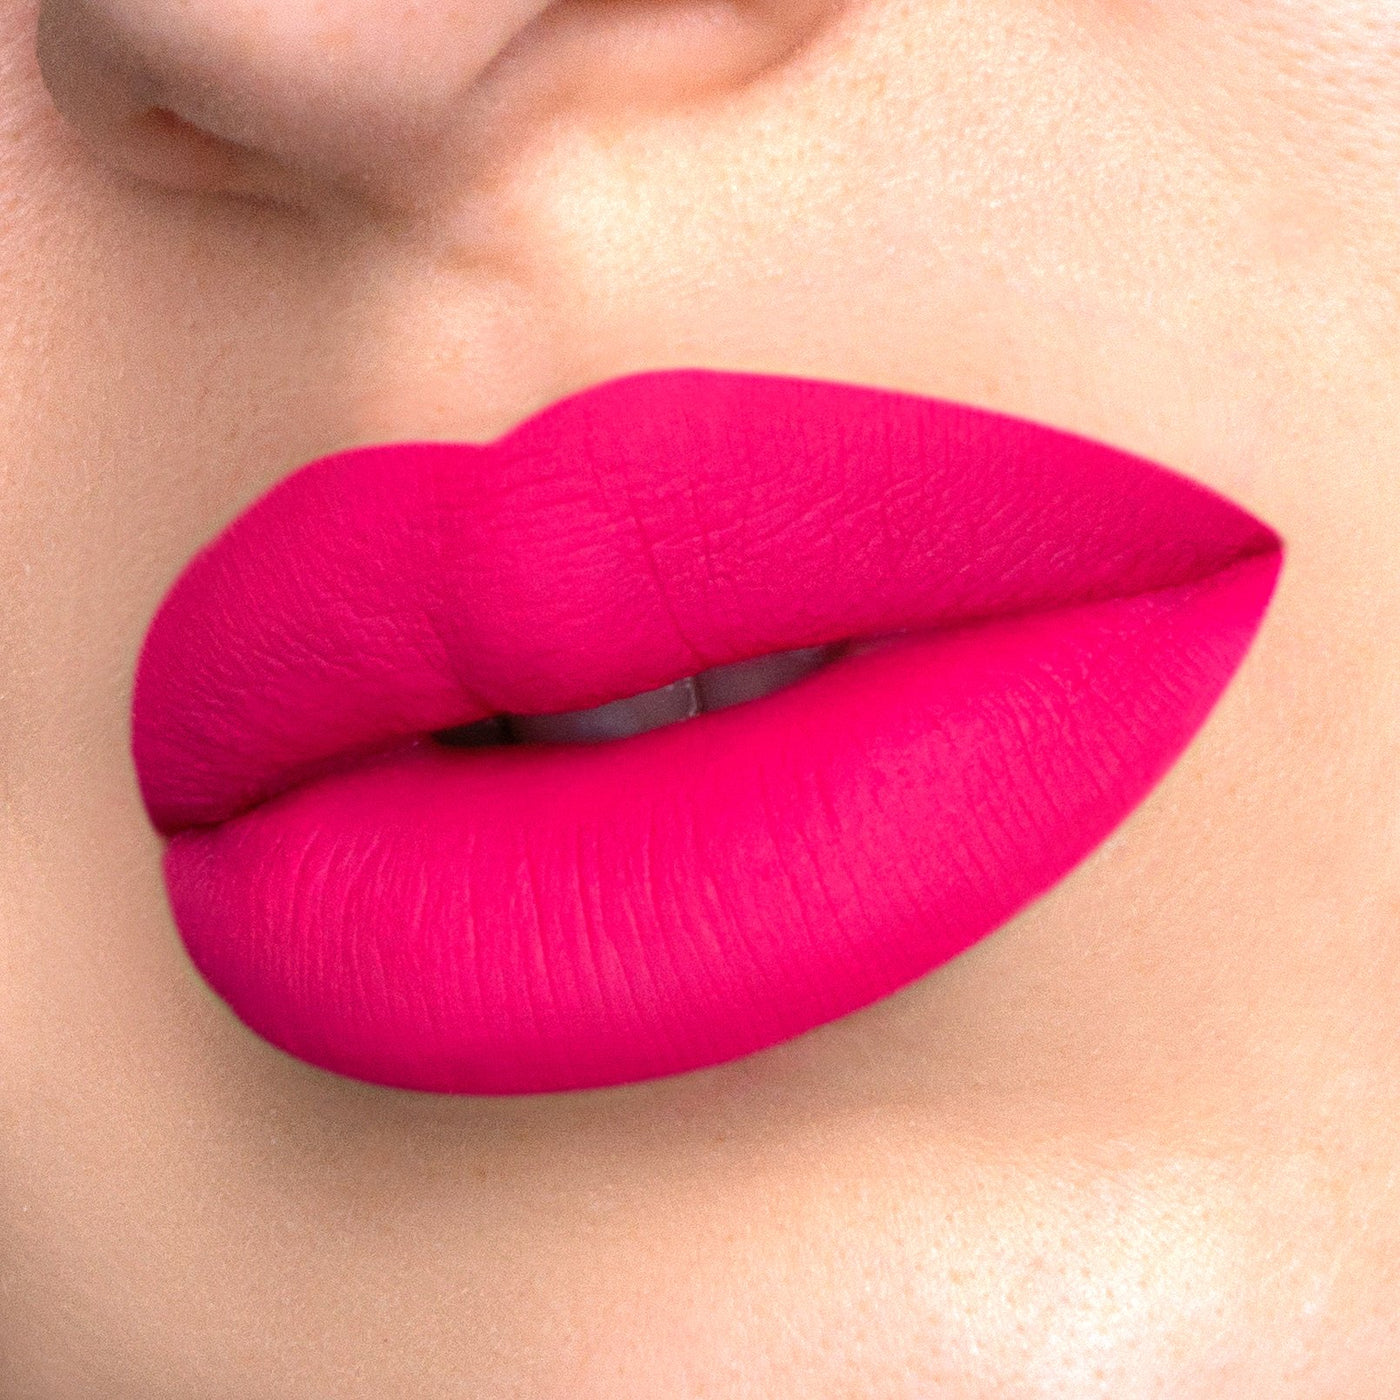 Fantasy a hot pink liquid lipstick swatched on model